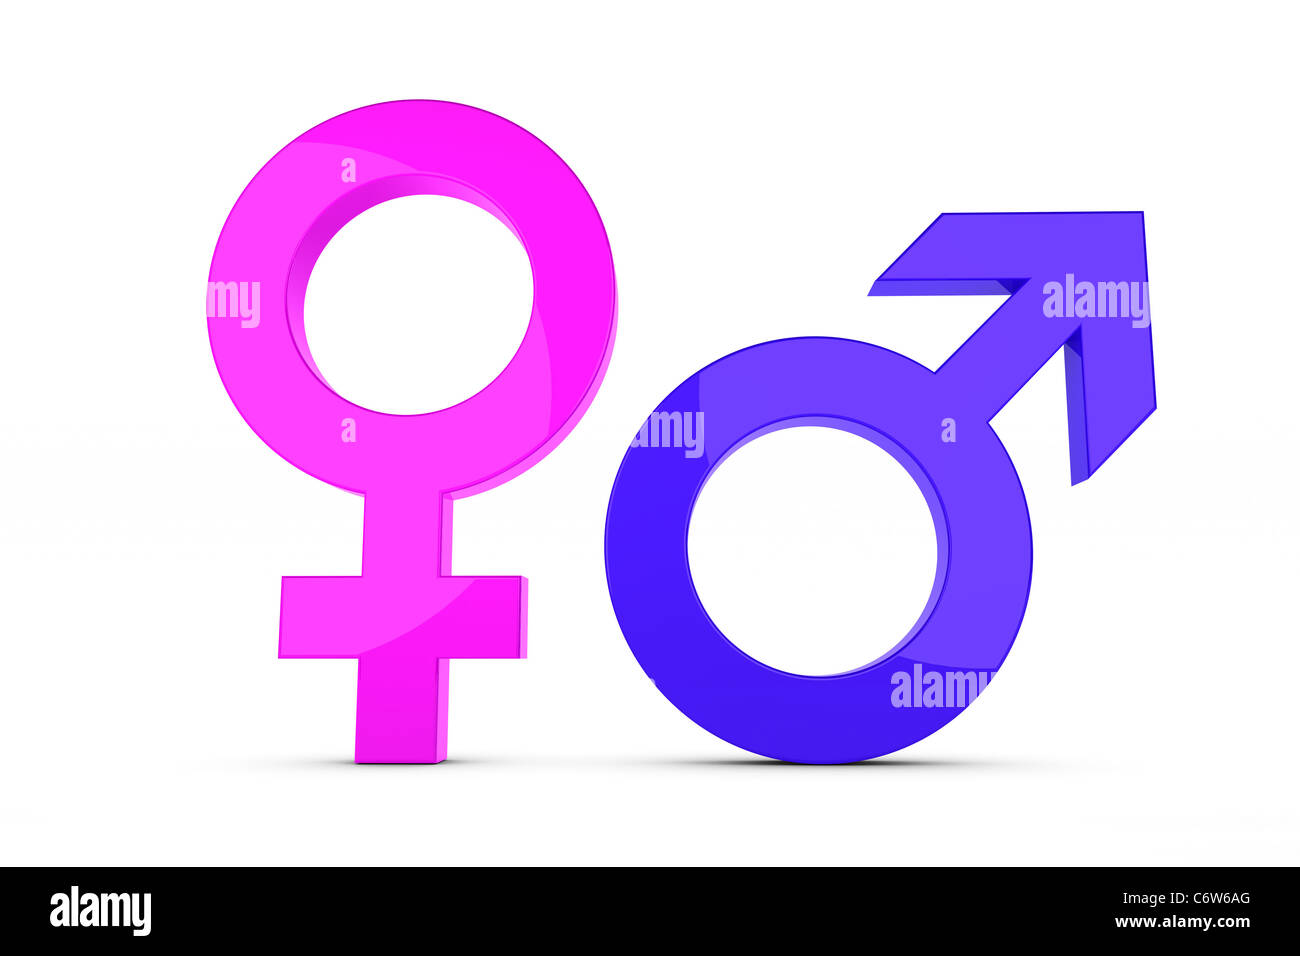 3d render of a femal and male sign Stock Photo